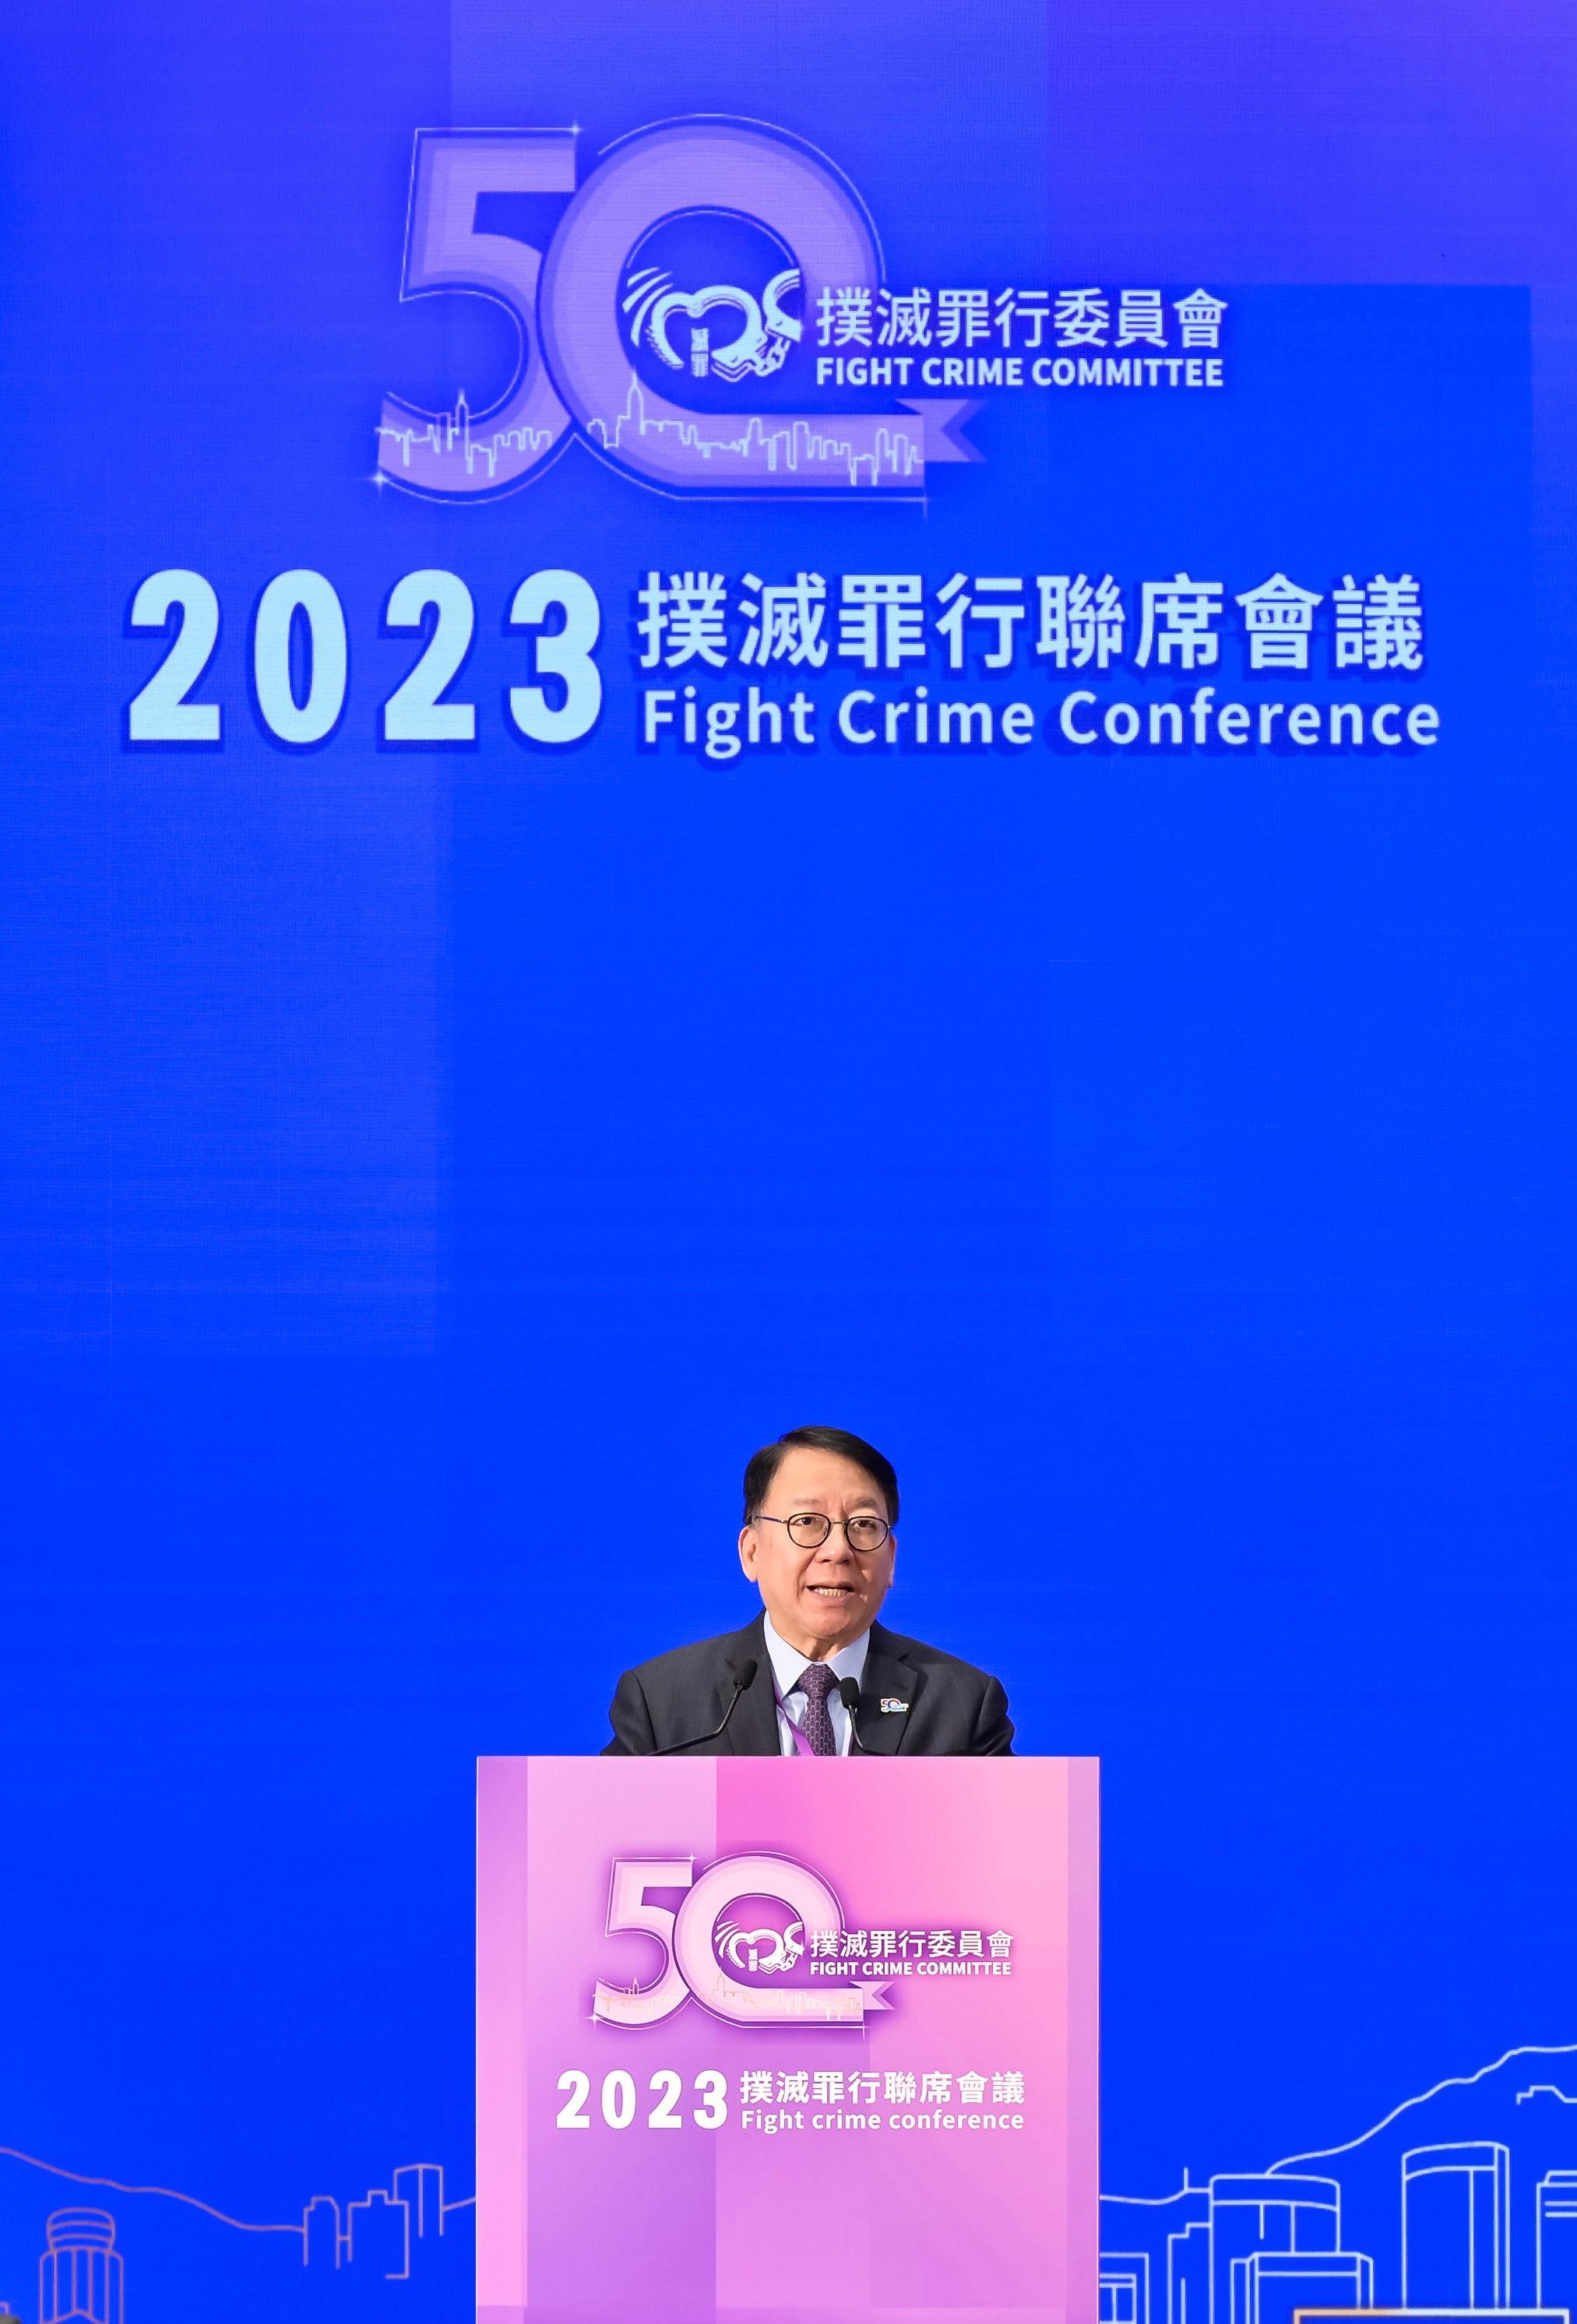 The Chief Secretary for Administration, Mr Chan Kwok-ki, speaks at the 2023 Fight Crime Conference at Central Government Offices in Tamar this morning (November 18).